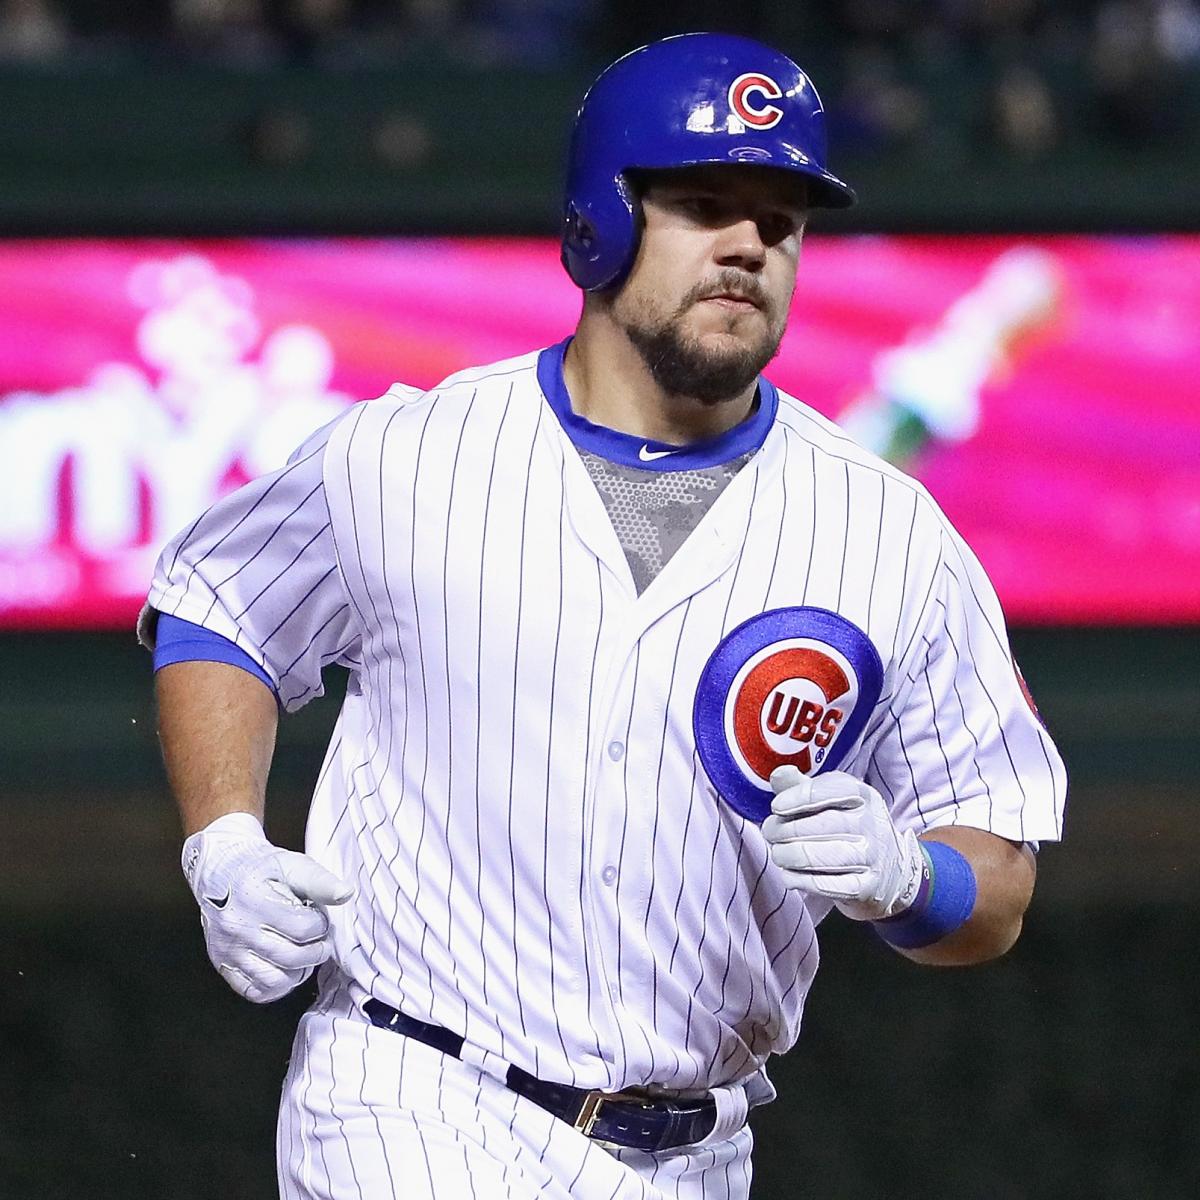 Kyle Schwarber could soon become a force for Cubs in the second